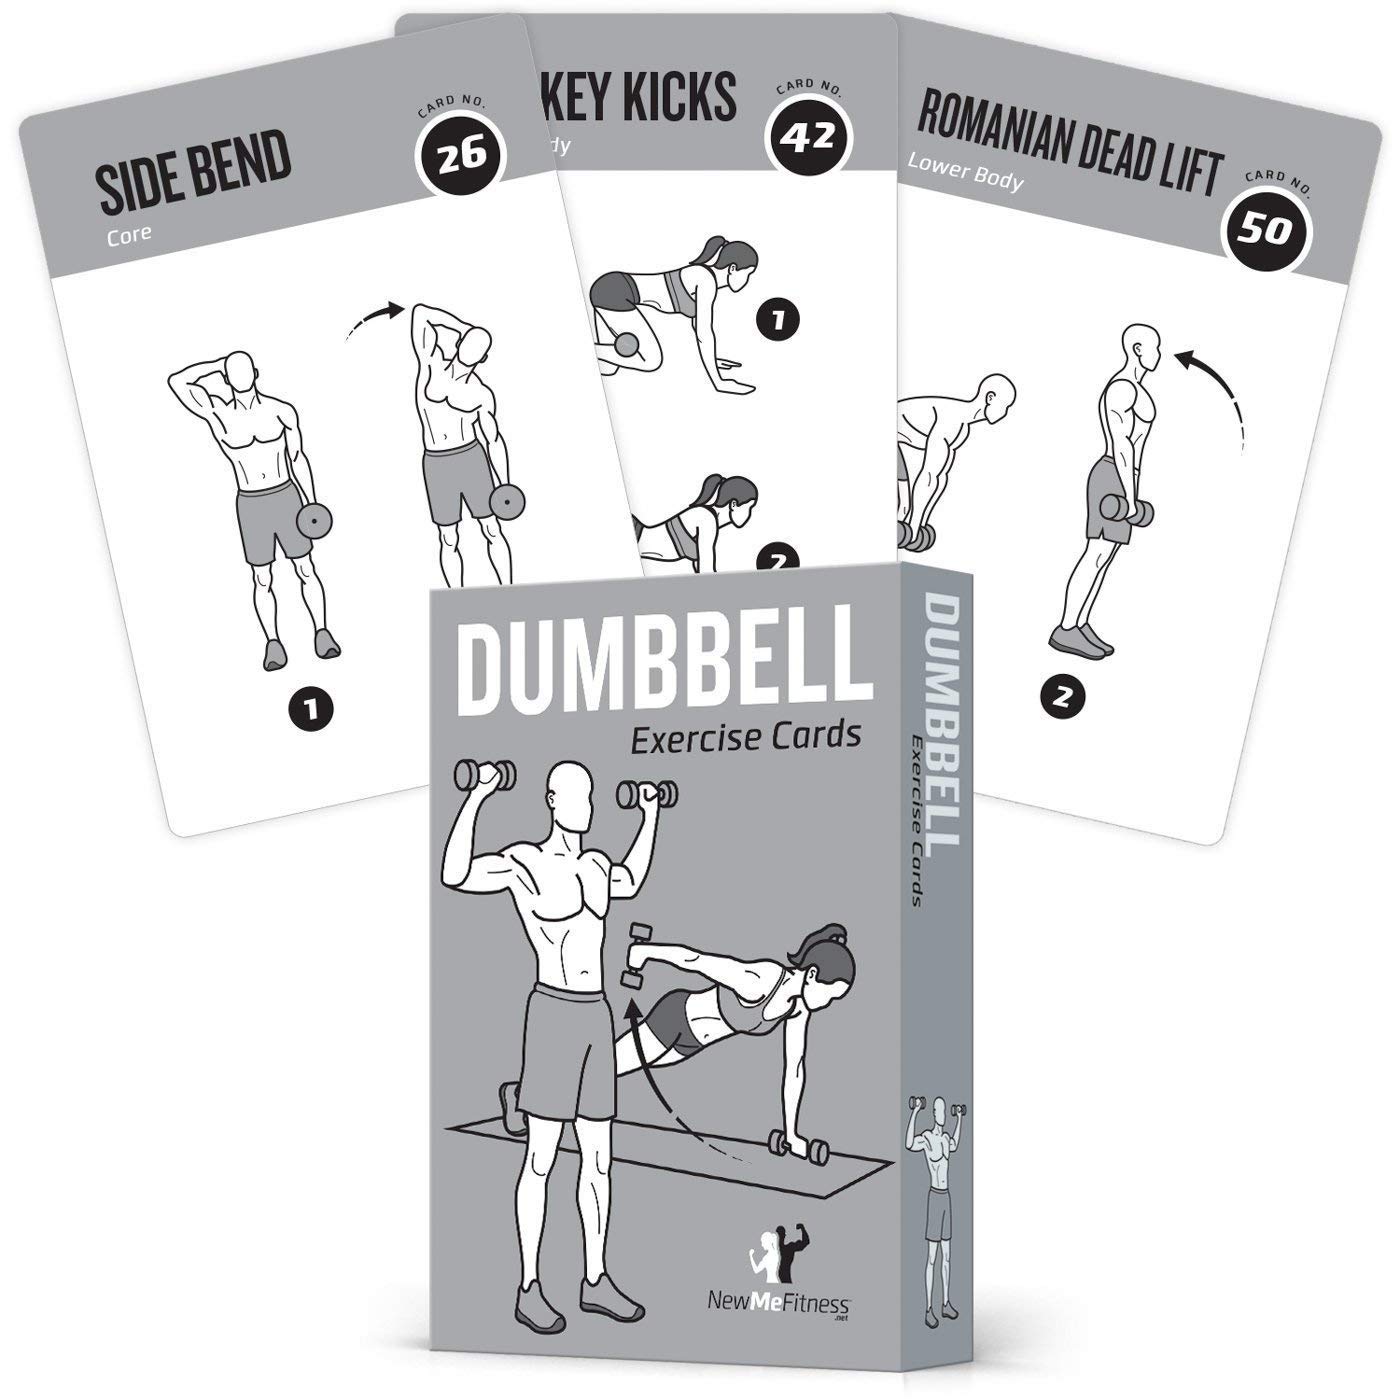 Book Cover NewMe Fitness Workout Cards - Instructional Fitness Deck for Women & Men, Beginner Fitness Guide to Training Exercises at Home or Gym Dumbbell (Vol 1)